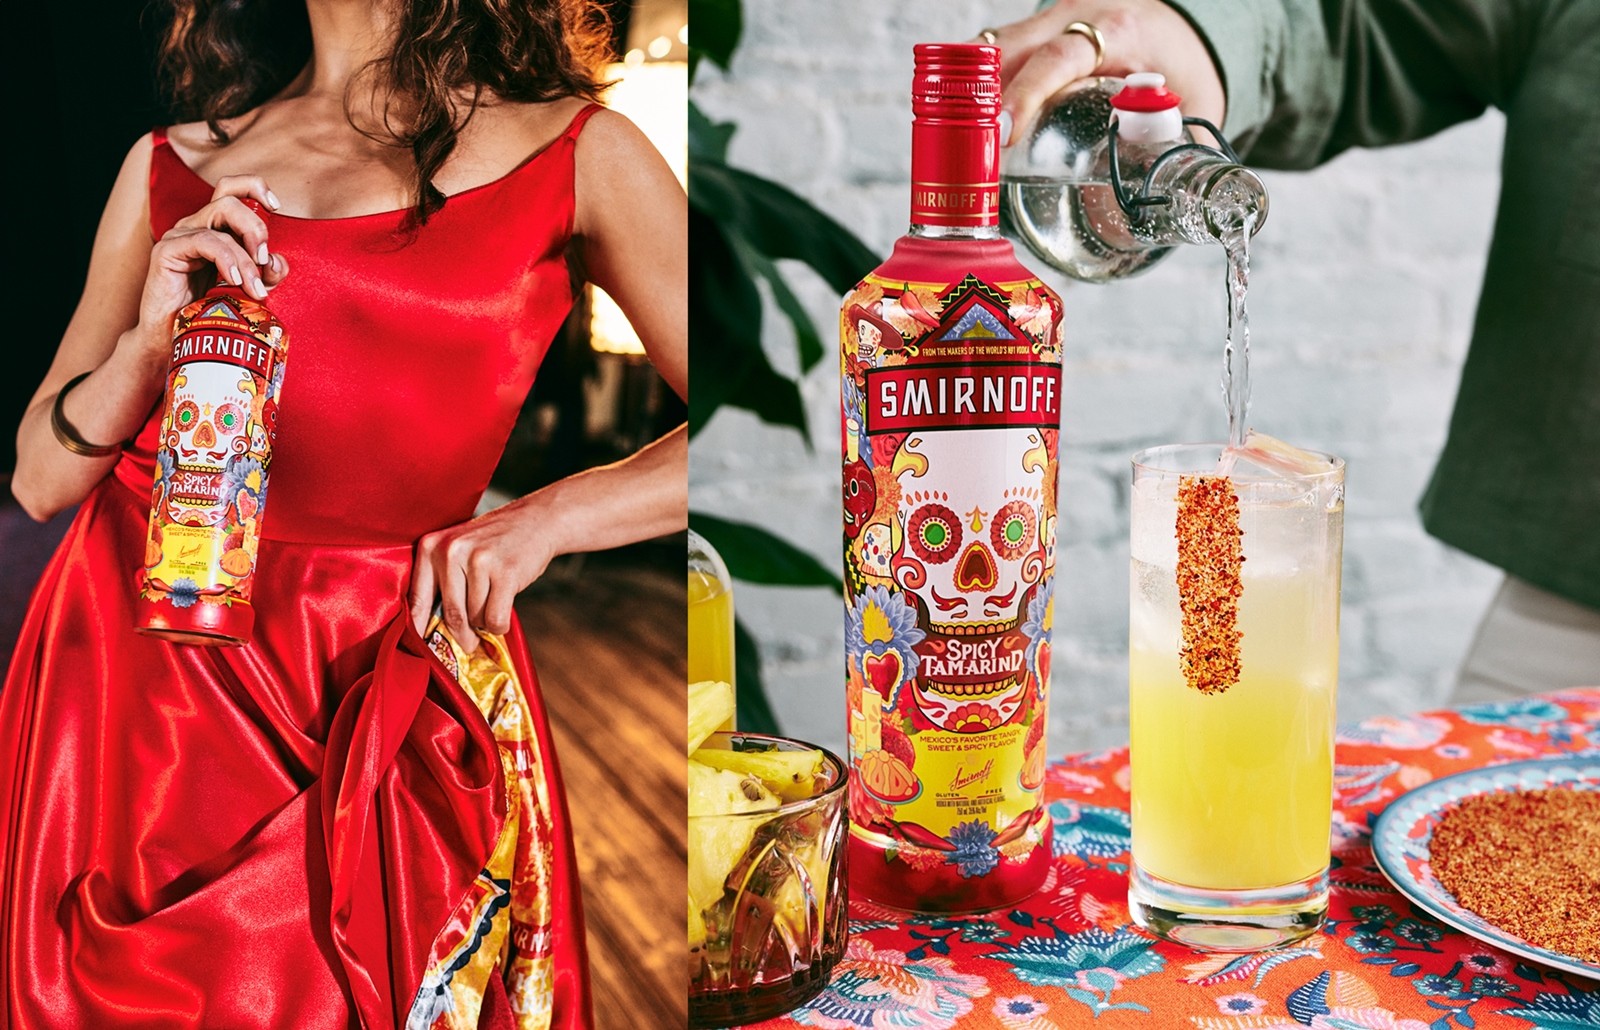 “Cinco de Mayo is just the first stop on this flavorful journey together,” said Spicy Tam, Smirnoff’s First-Ever Baila Ambassador. “Smirnoff Spicy Tamarind and I are turning up the heat all summer long – bringing the spicy vibes to celebrations everywhere with delicious cocktails, great music and more, so be sure to stay tuned for all the fun we have planned!”